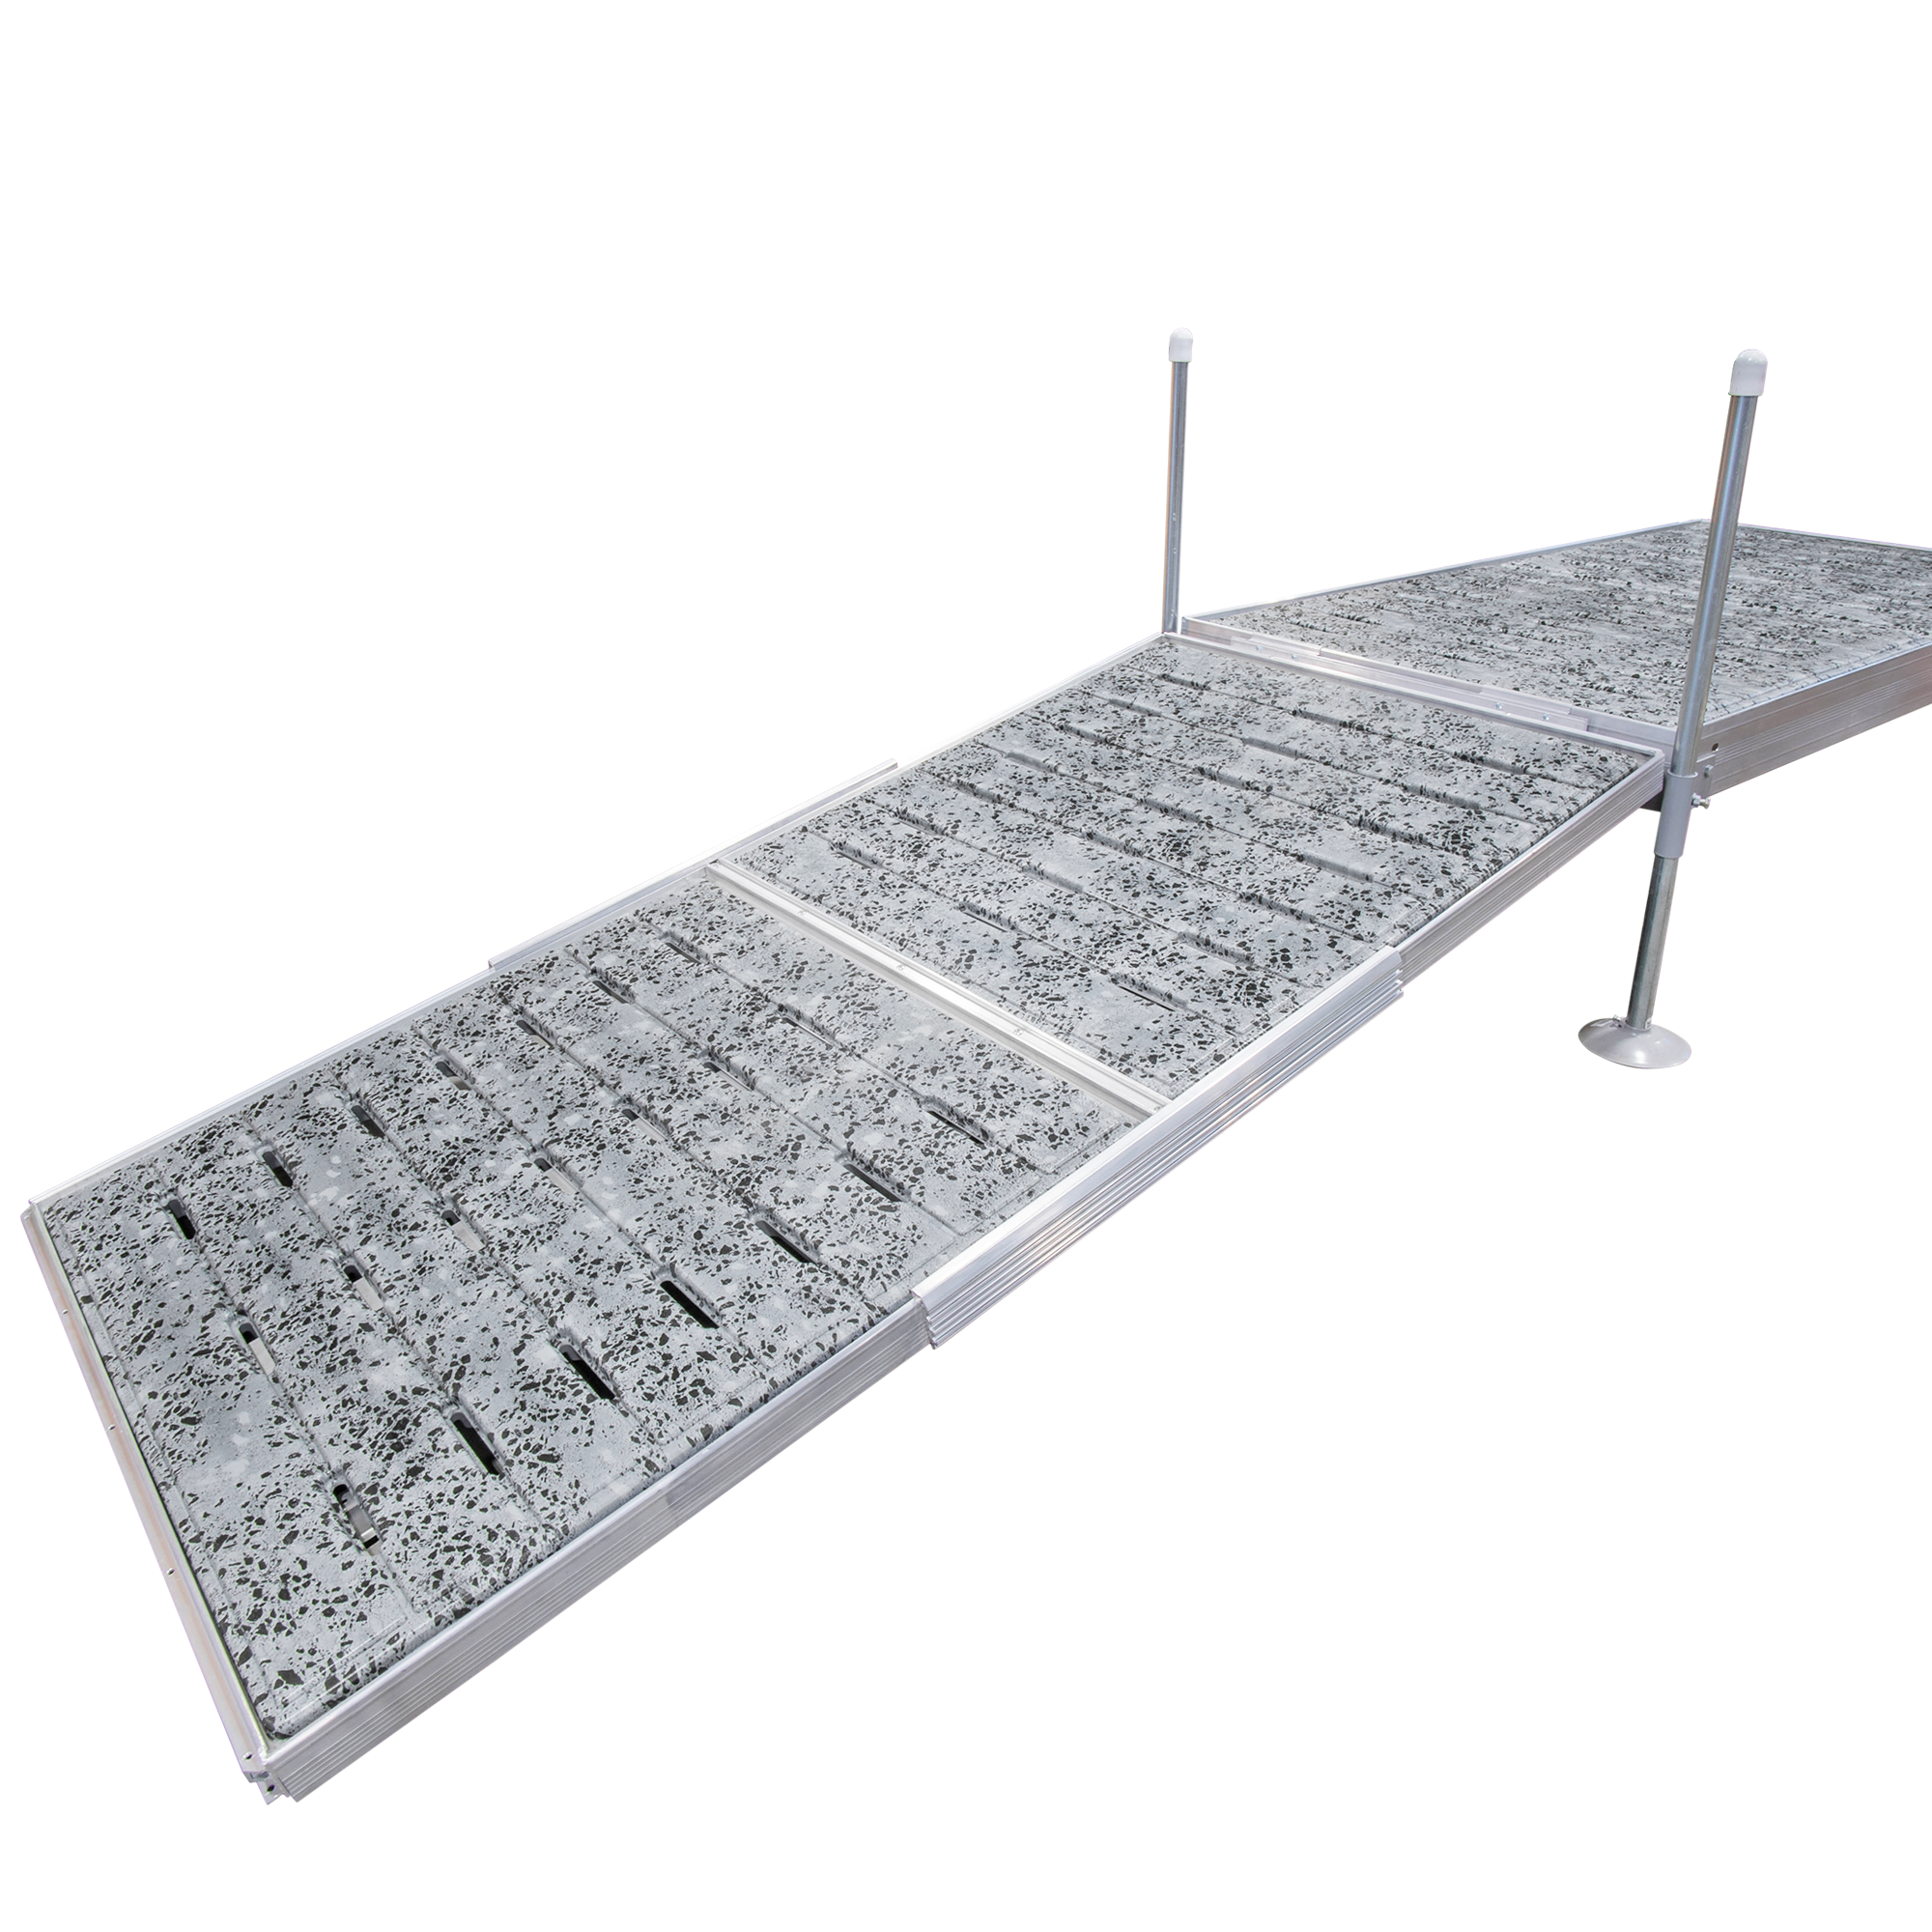 8' Modular Aluminum Gangway with Thermoformed Terrazzo Decking